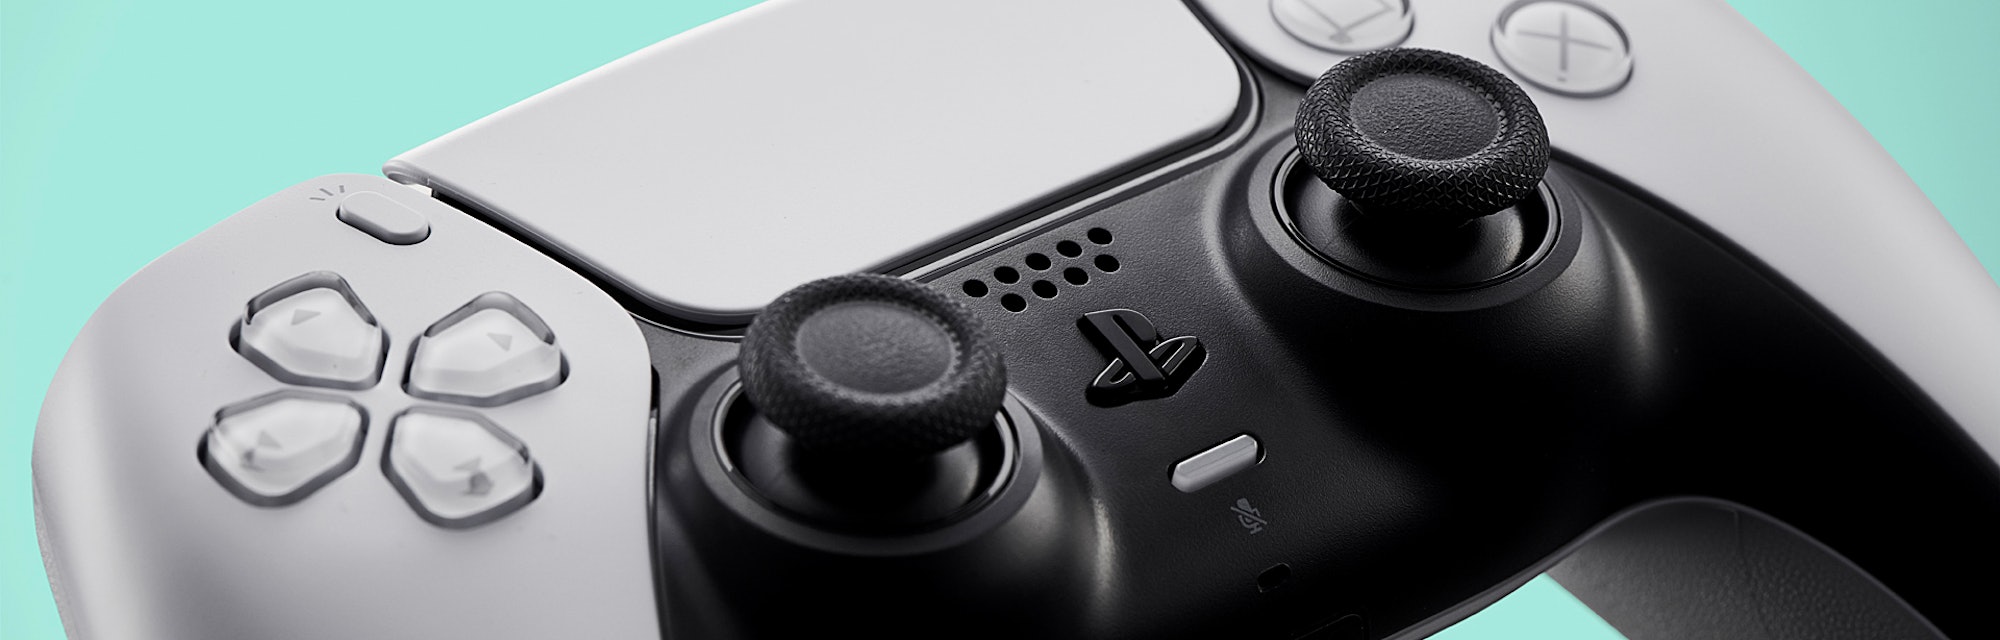 A Sony PlayStation 5 DualSense controller, taken on October 29, 2020. (Photo by Olly Curtis/Future P...